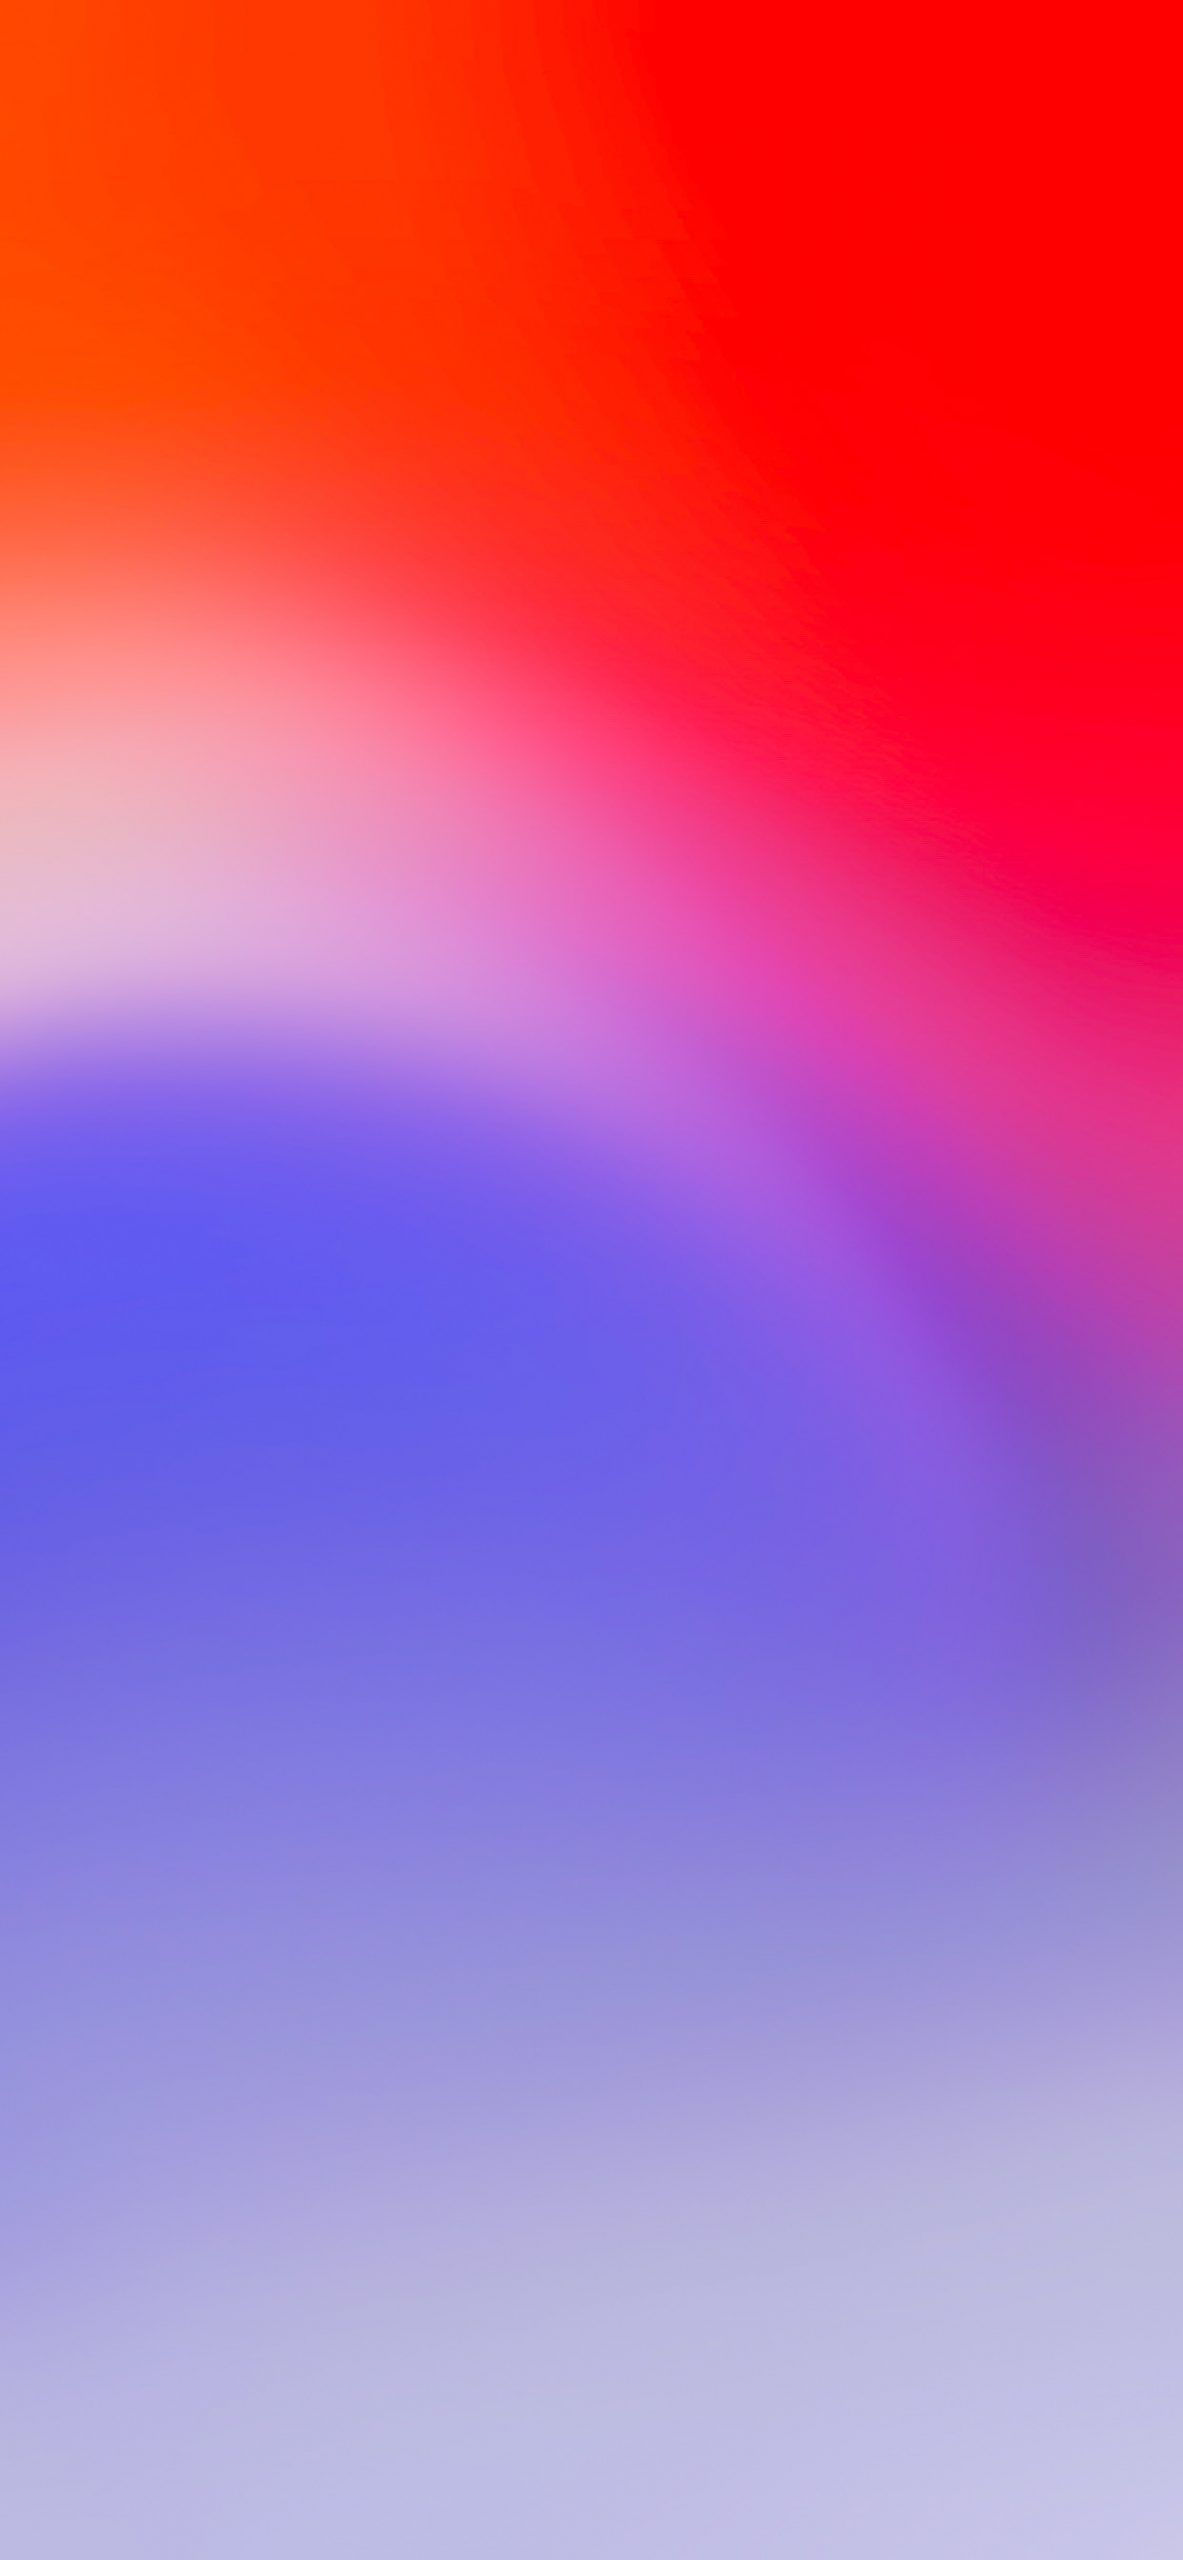 iOS 14 Concept on Twitter. Colorful wallpaper, Stock wallpaper, iPhone wallpaper